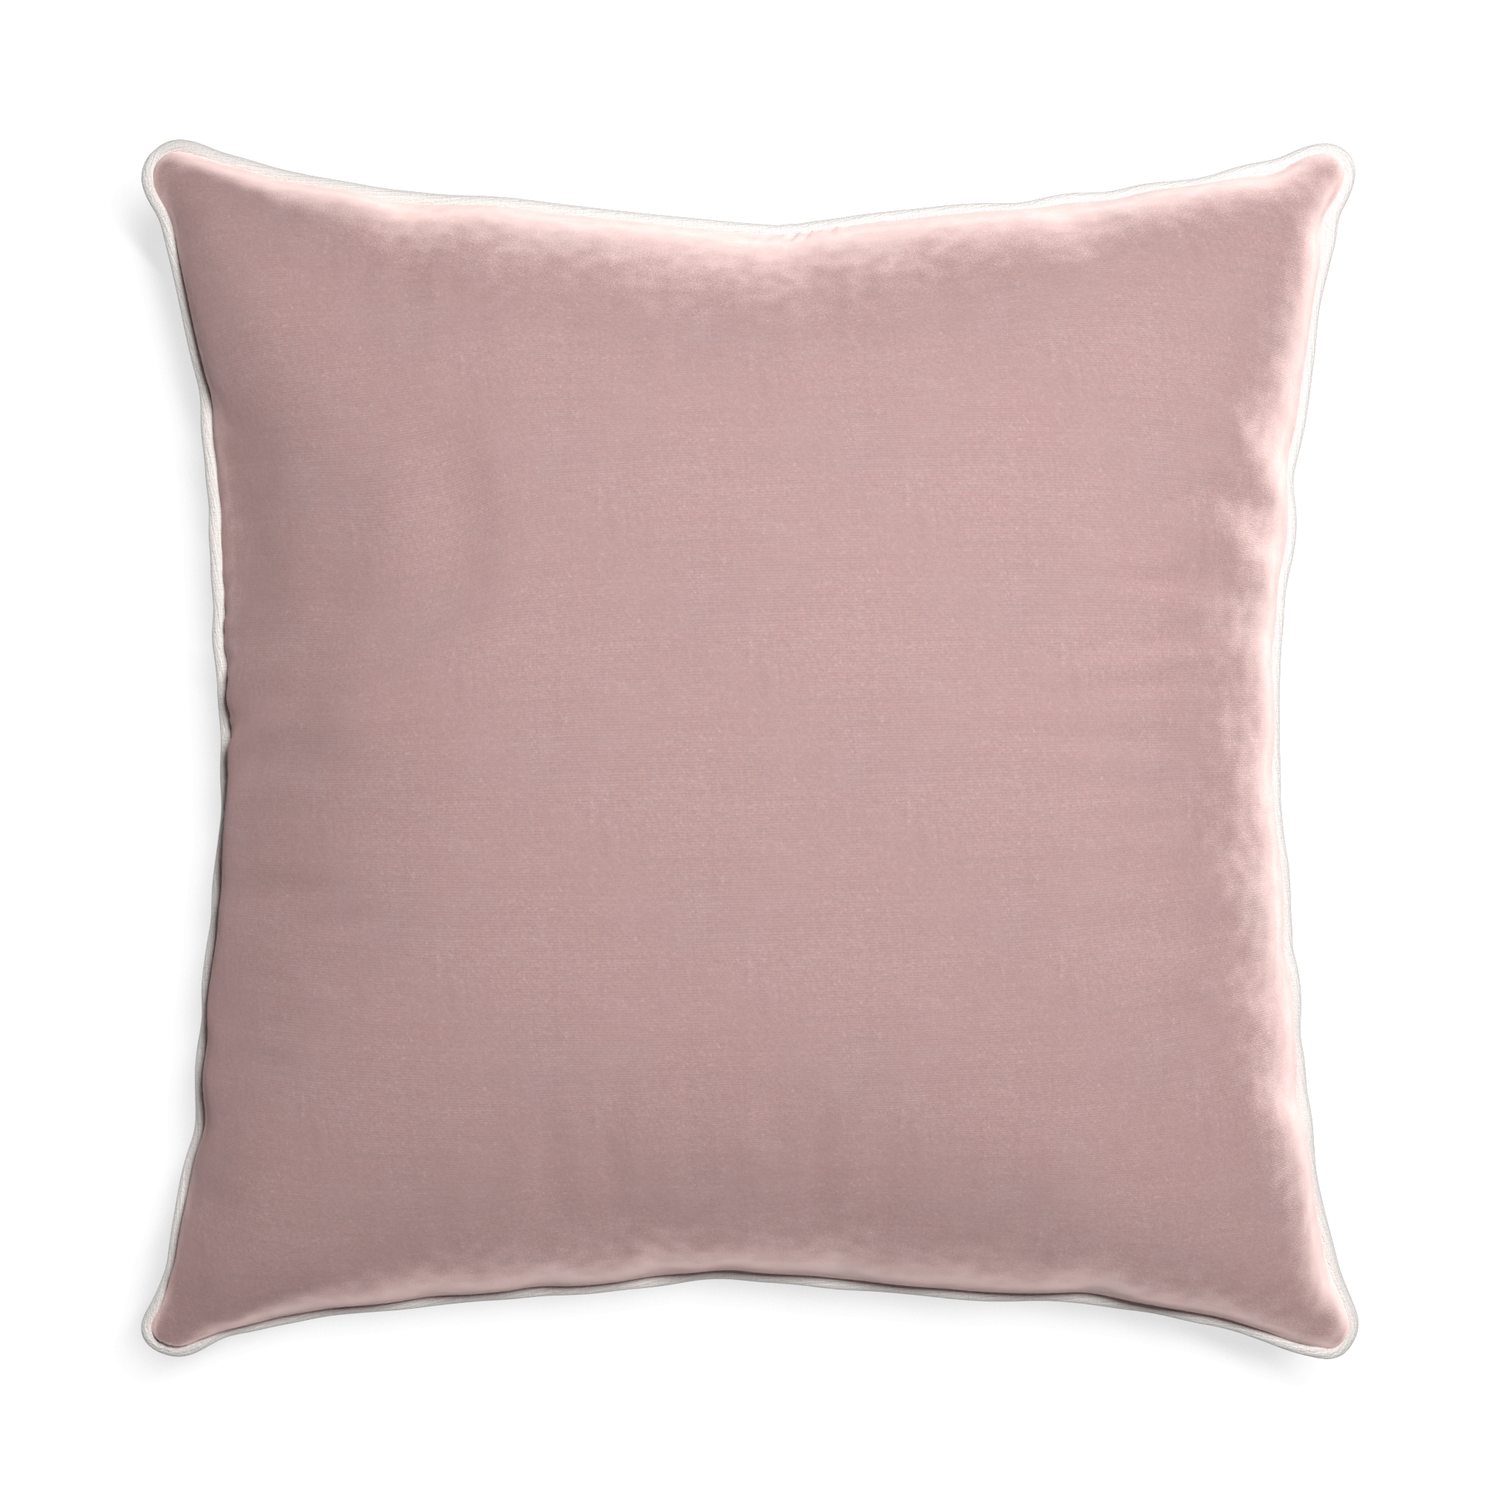 square mauve velvet pillow with white piping